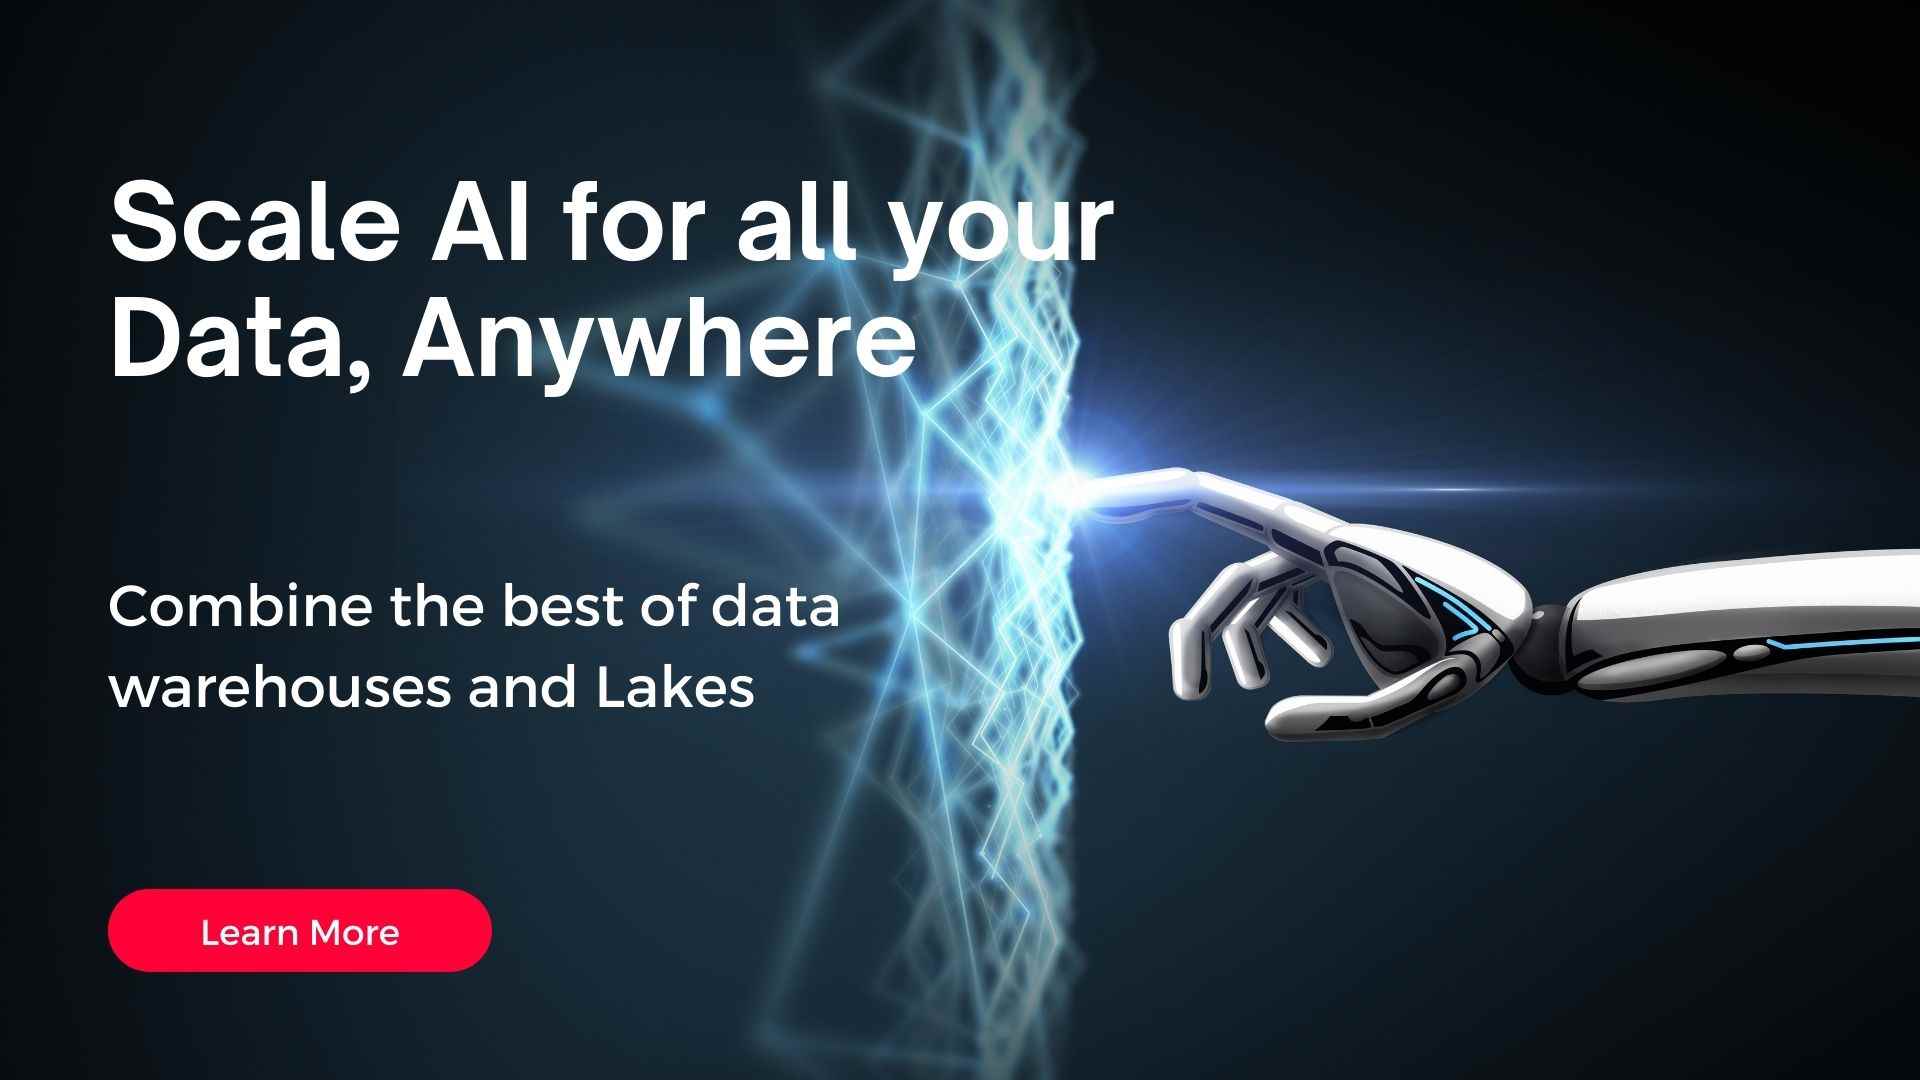 Scale AI for all your Data, Anywhere